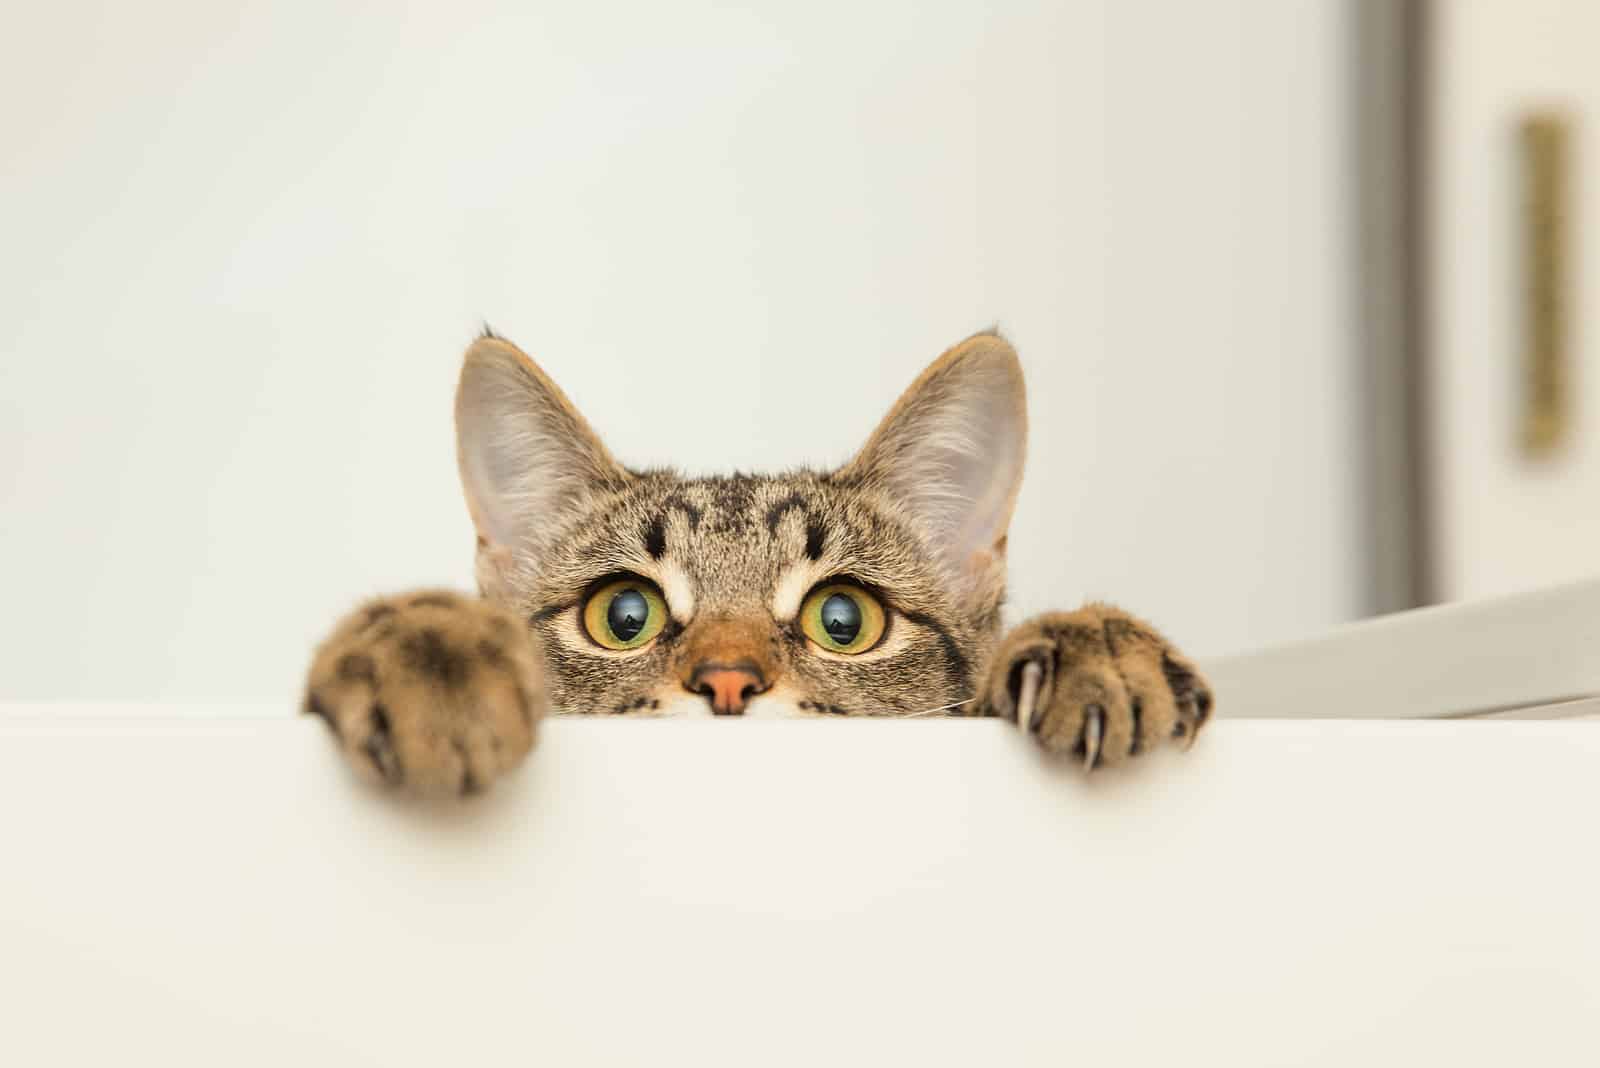 a young cat curiously peeking out